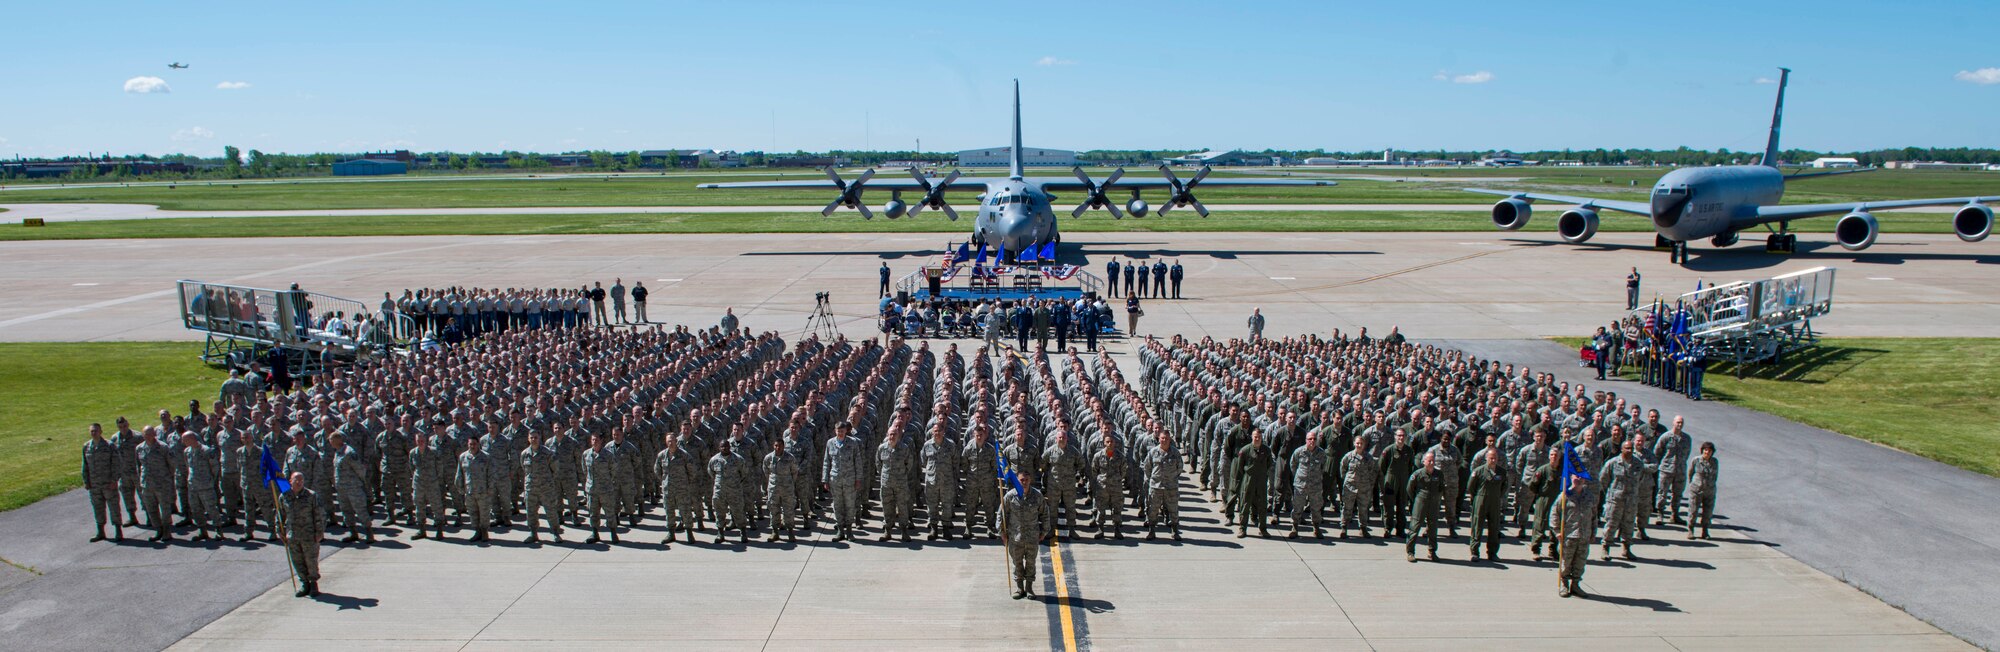 The 914th Airlift Wing was re-designated as an air refueling wing during a special ceremony held June 3, 2017 at the Niagara Falls Air Reserve Station, N.Y. This ceremony marked the transition for the wing from the C-130 Hercules to the KC-135 Stratotanker.  (U.S. Air Force photo by Tech. Sgt. Stephanie Sawyer)